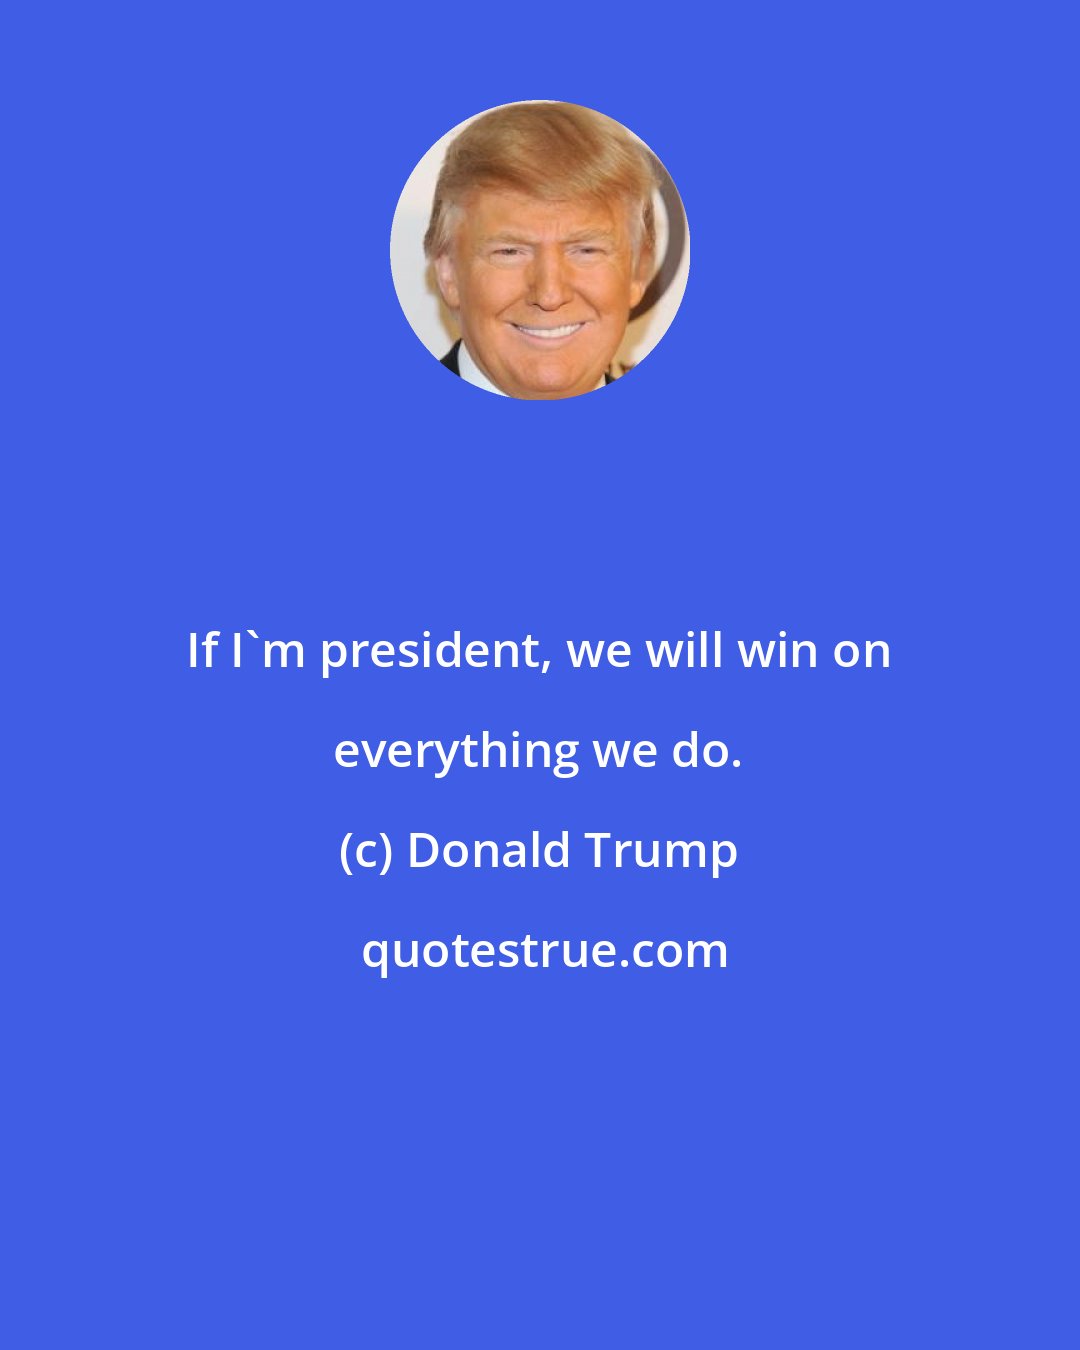 Donald Trump: If I'm president, we will win on everything we do.